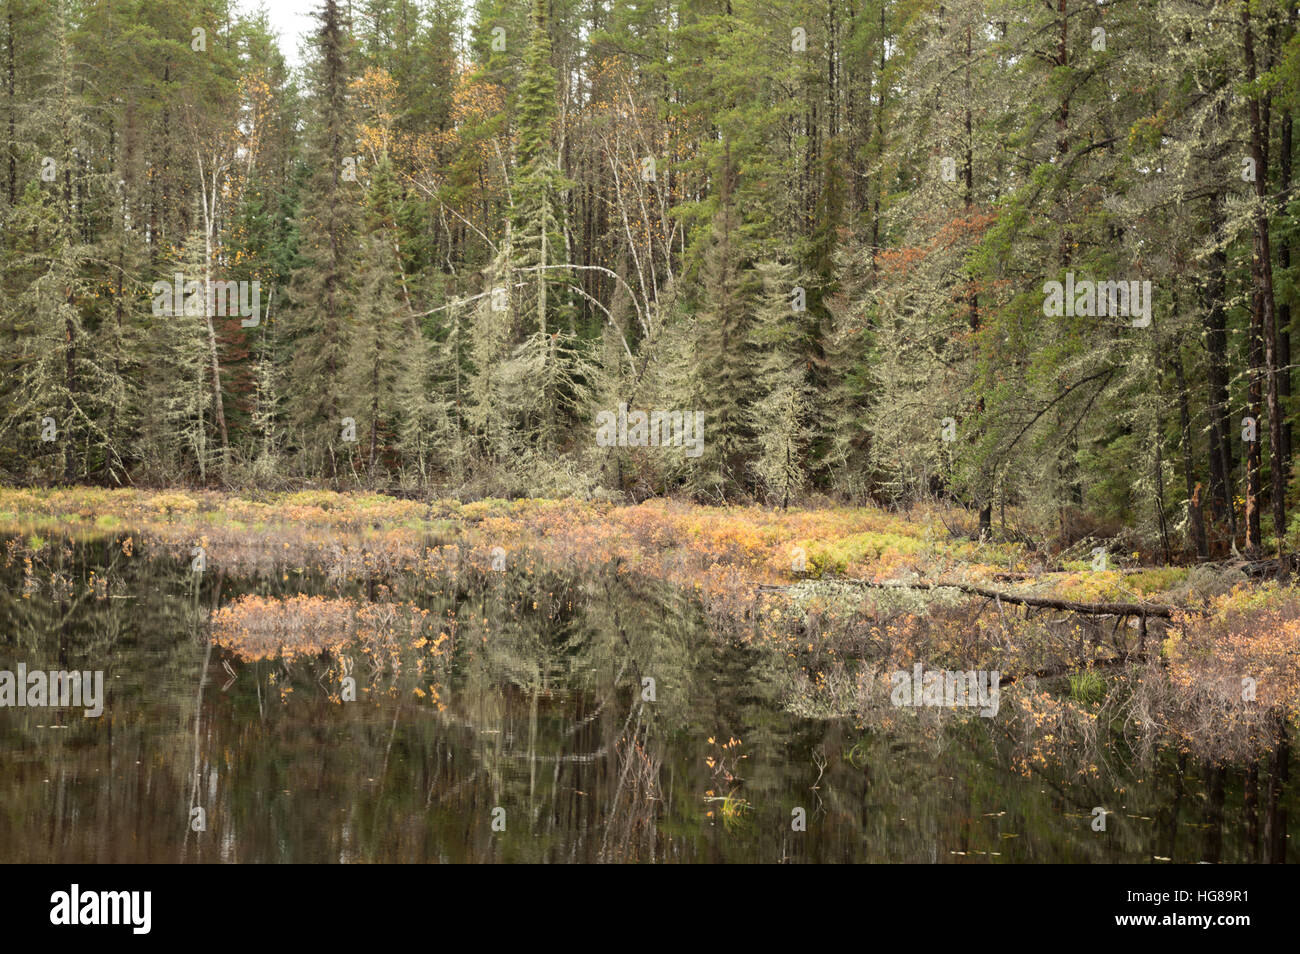 A calm, tranquil autumn image of the peace wilderness with spruce, fir and cedar trees, sage green with lichens, and mosses reflecting in the dead cal Stock Photo